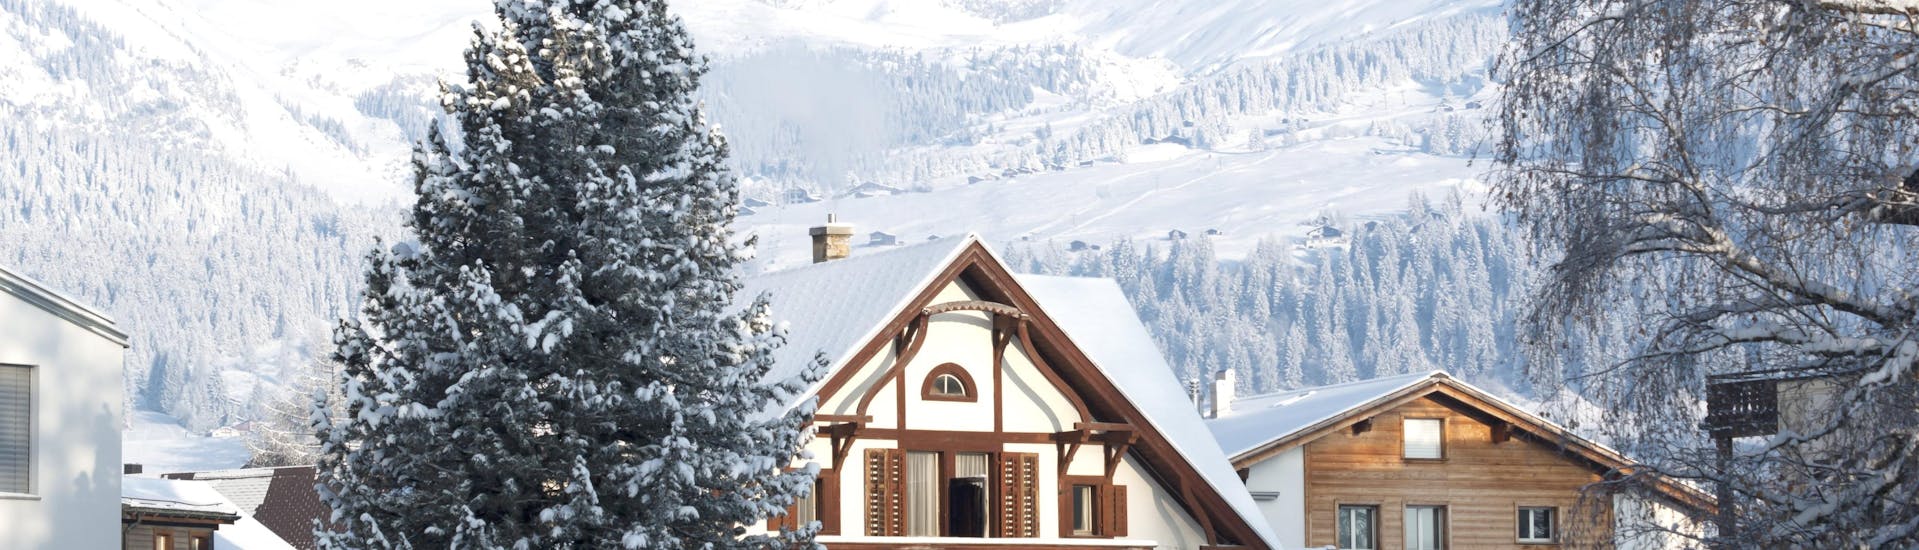 An image of some of the snow-covered chalets in the Swiss ski resort of  Laax-Flims-Falera, where visitors can books ski lessons with one of the local ski schools.